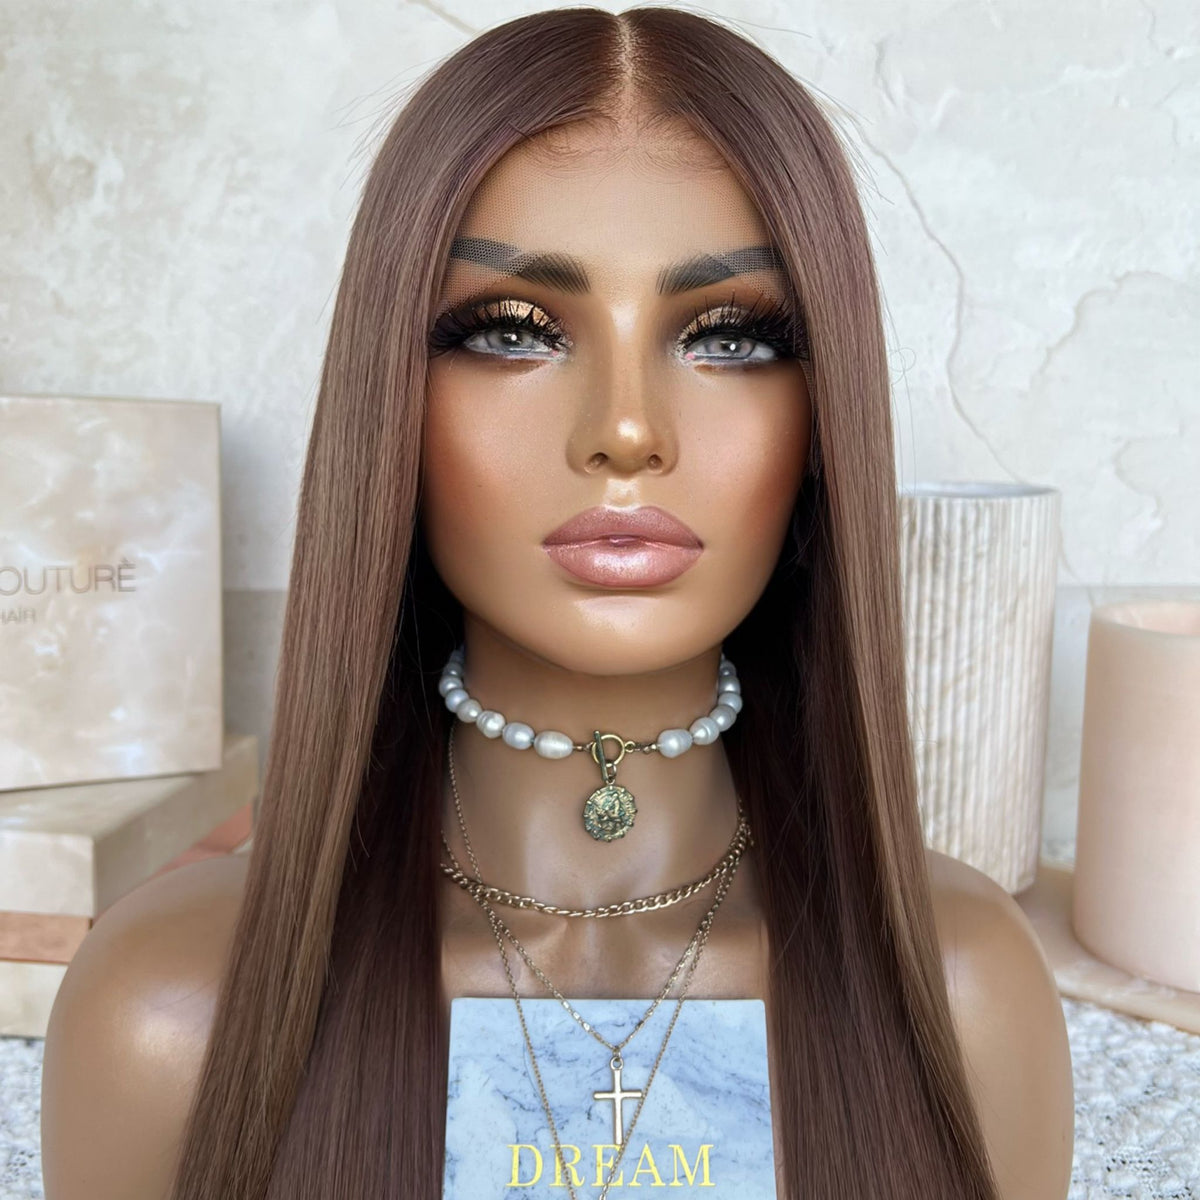 CHEYANNE | LACE FRONT